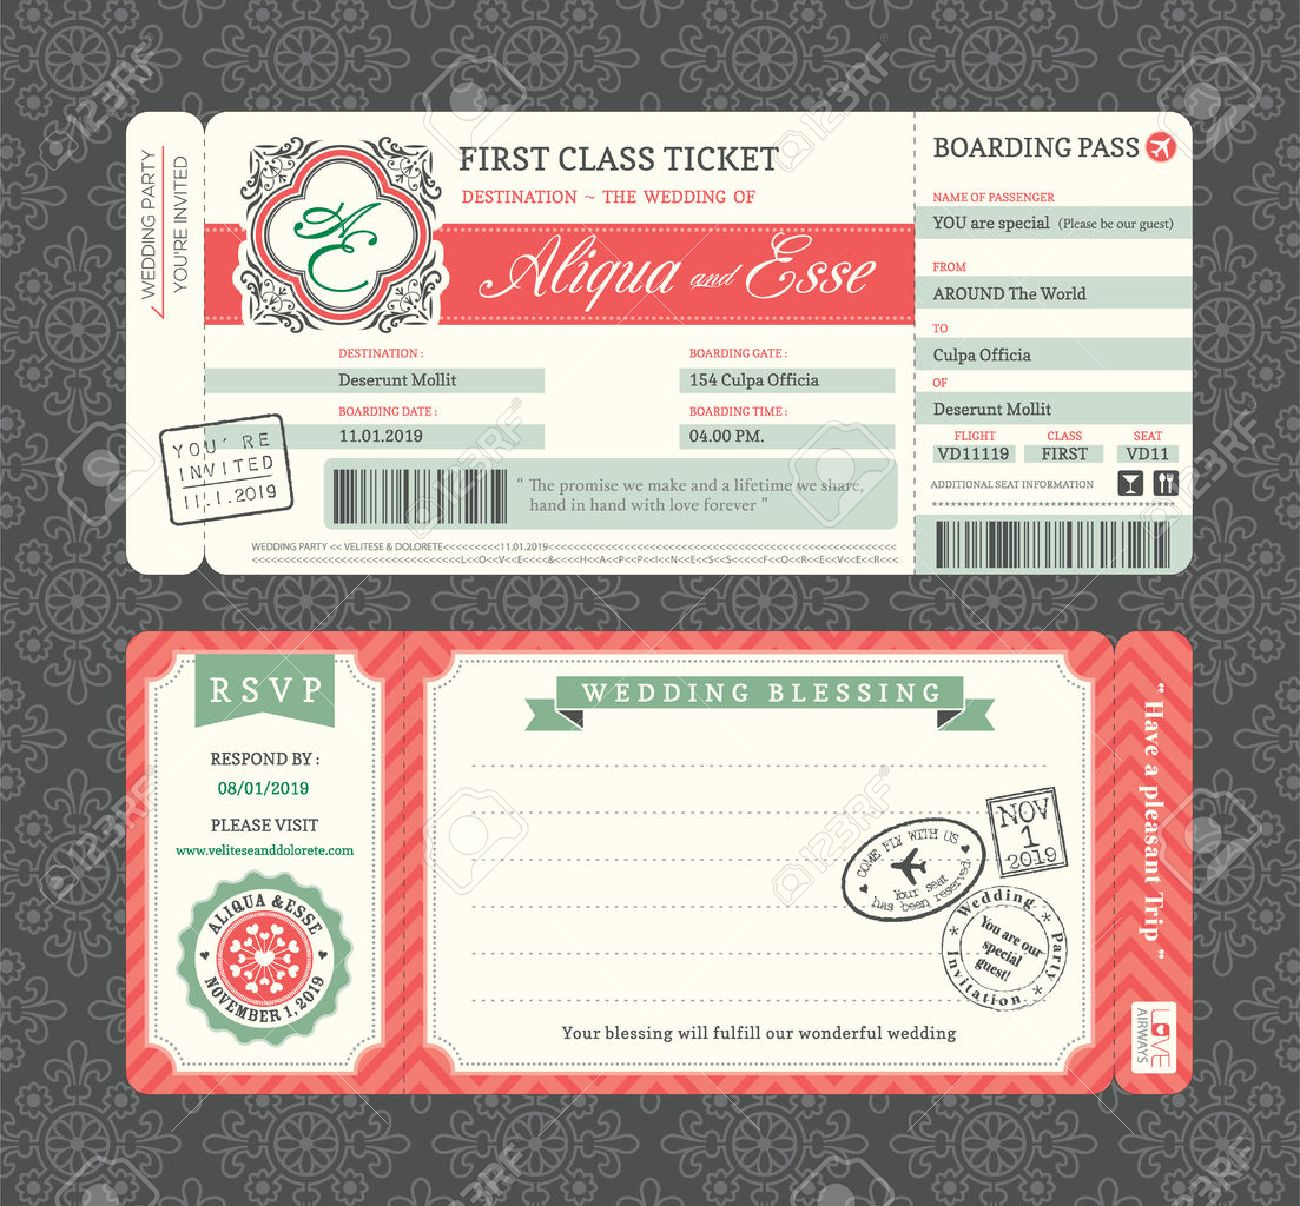 Vintage Boarding Pass Ticket Wedding Invitation Template Royalty inside proportions 1300 X 1206